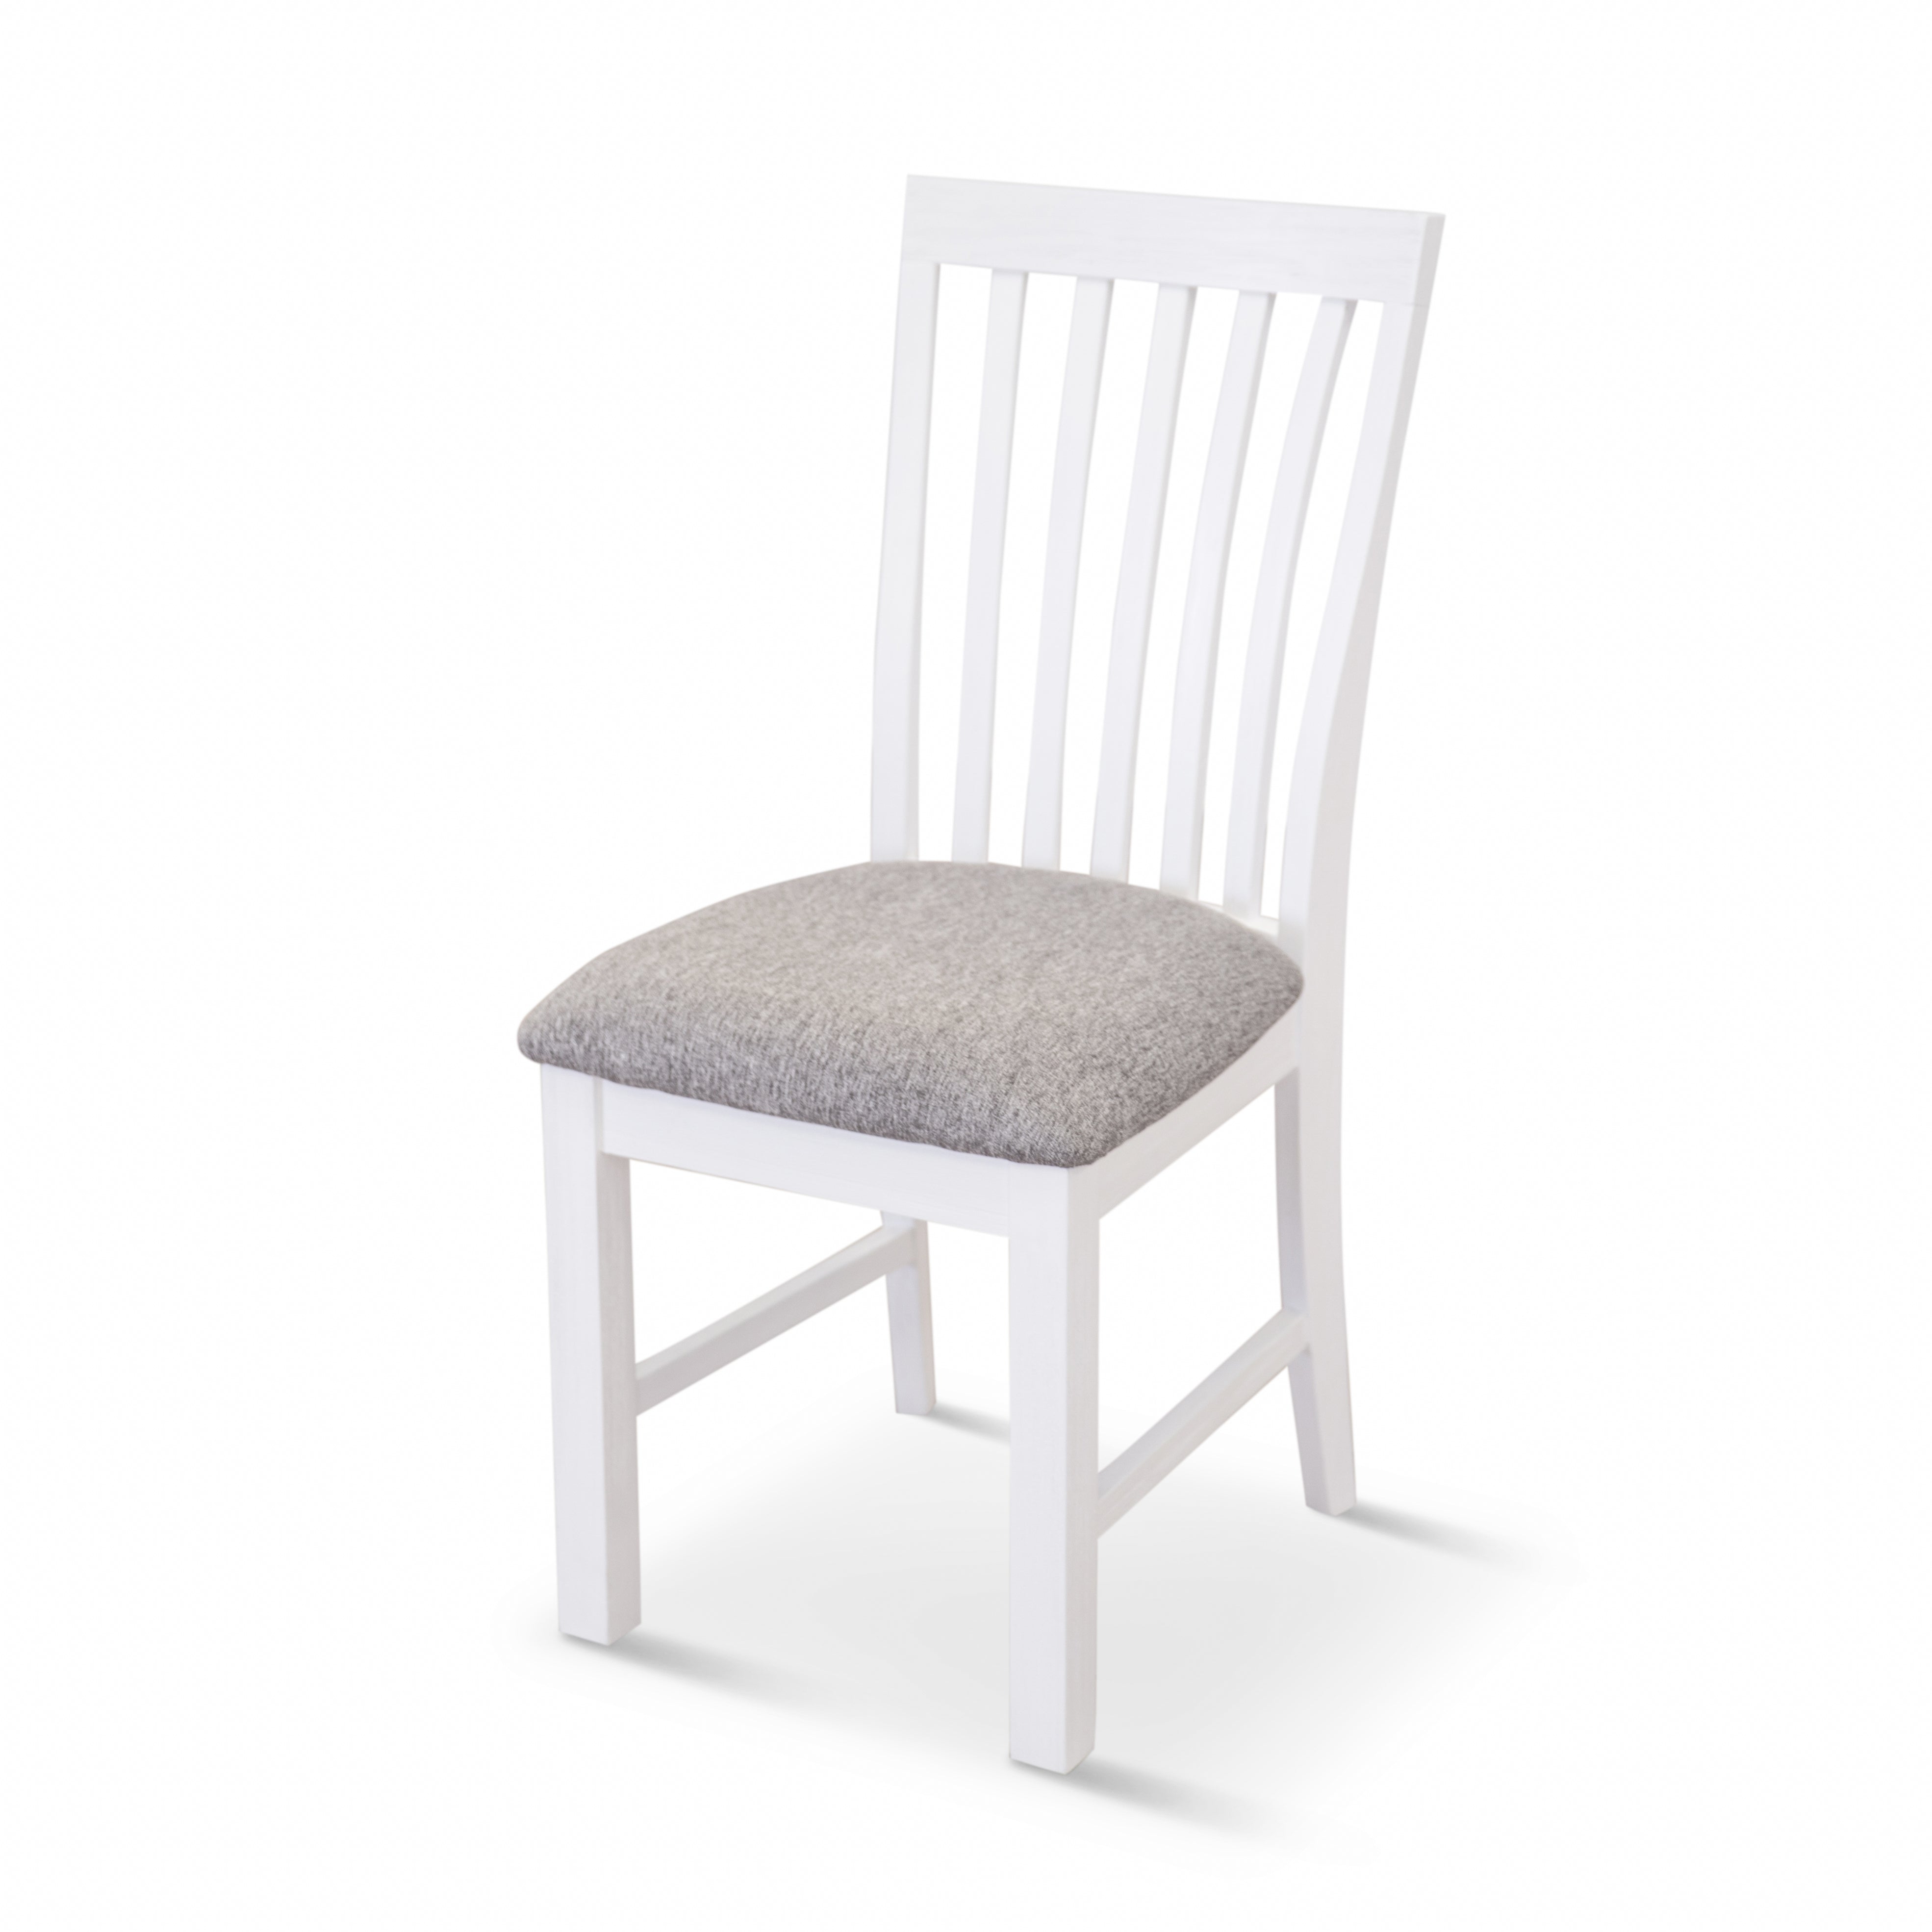 Dining Chair Set Of 2 Solid Acacia Timber Wood Coastal Furniture - White